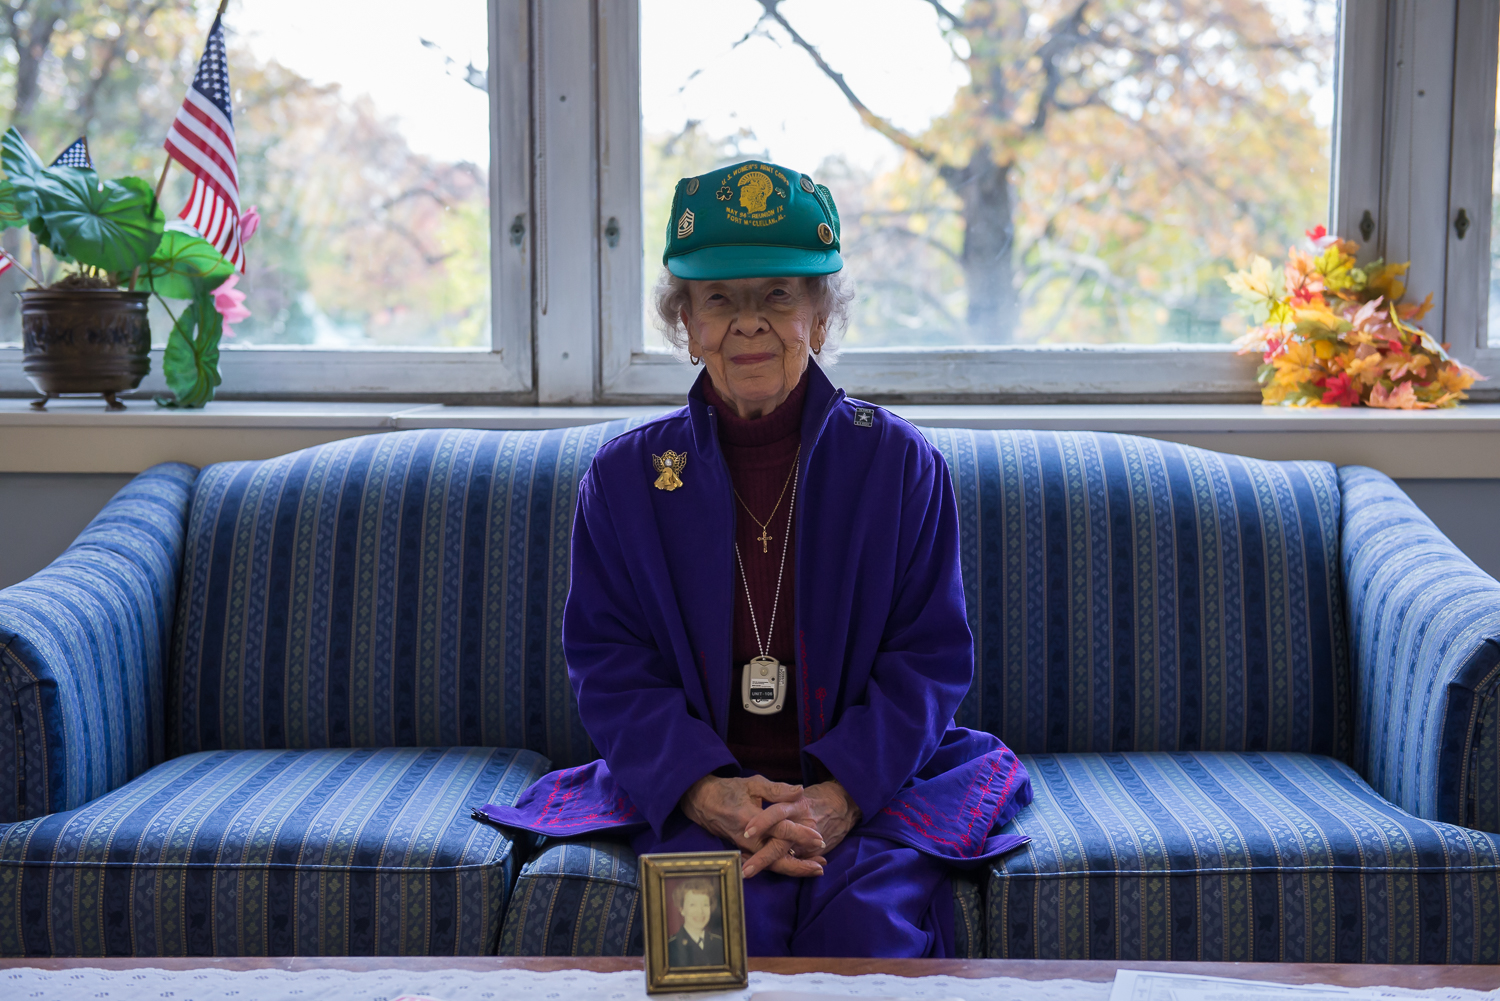  Elizabeth Lloyd poses for a portrait at the Armed Forces Retirement Home in Washington, DC. Lloyd, 90, joined the Women's Army Corps during World War II, then reenlisted after the war and ultimately retired from the Army in 1971. 